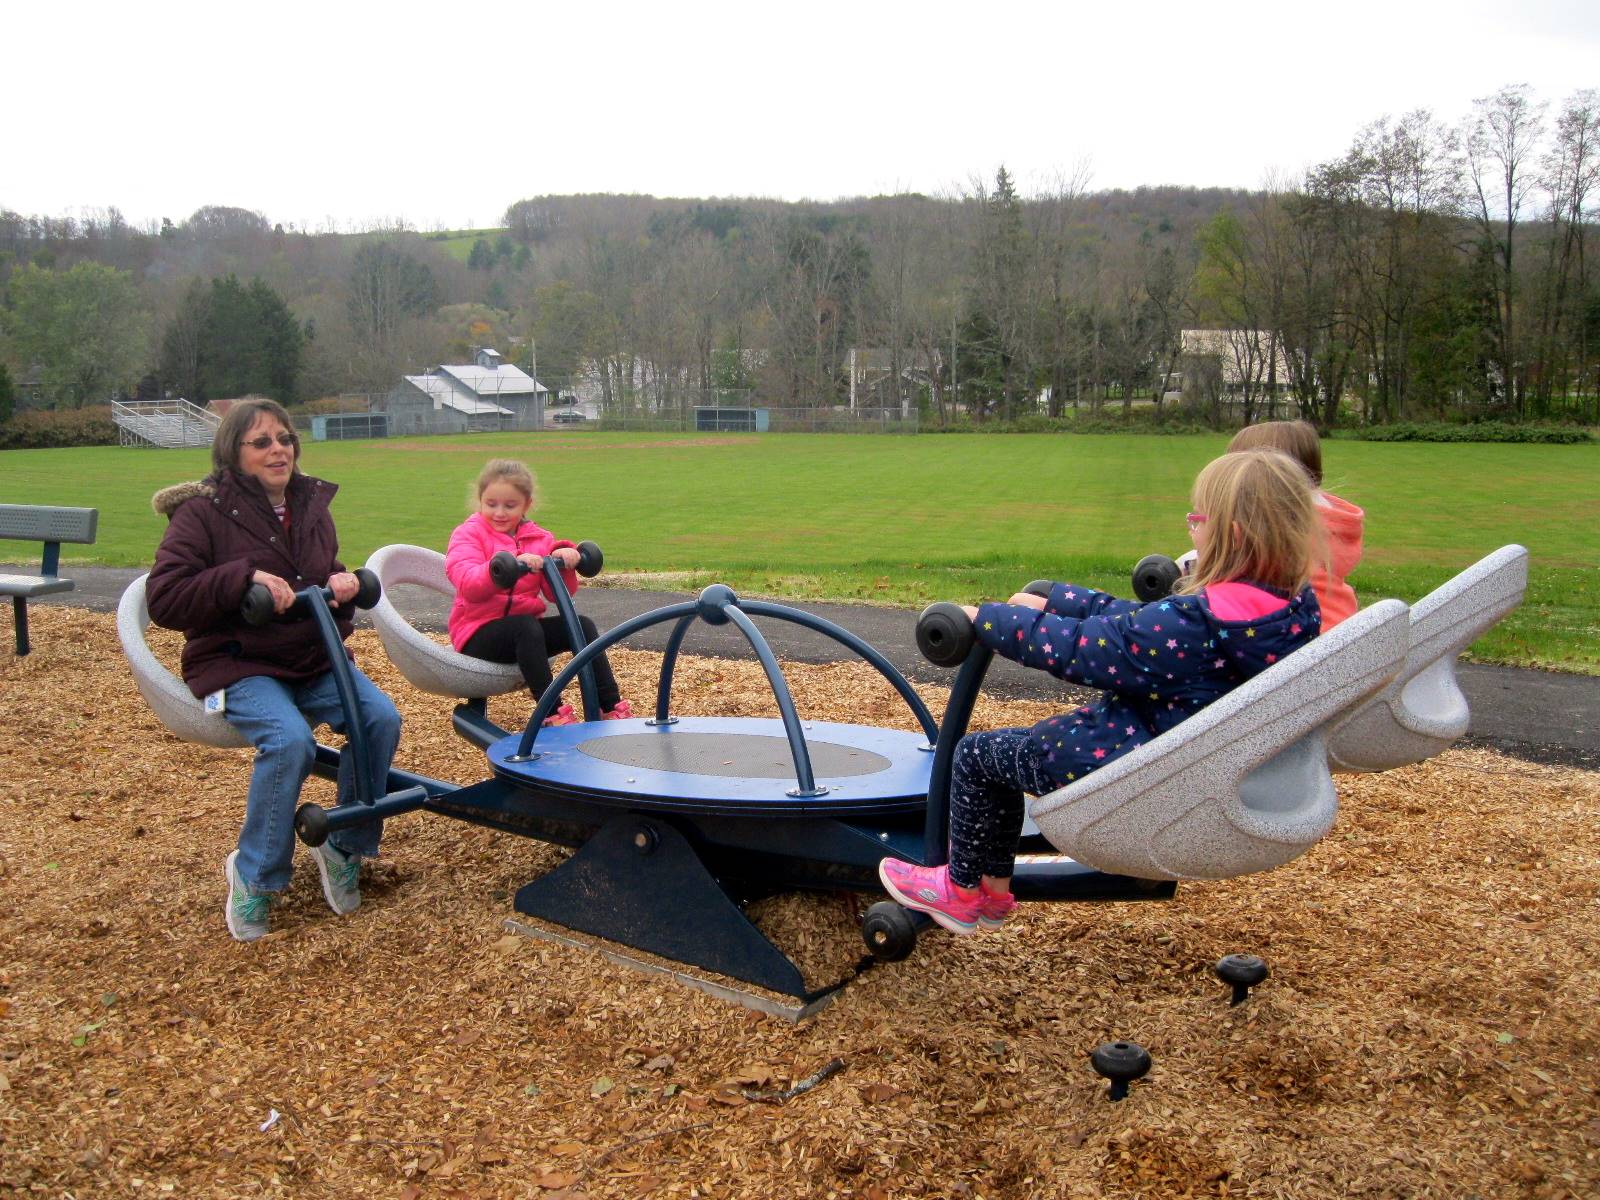 Kids try out the new teeter totter. There is an adult on there too!